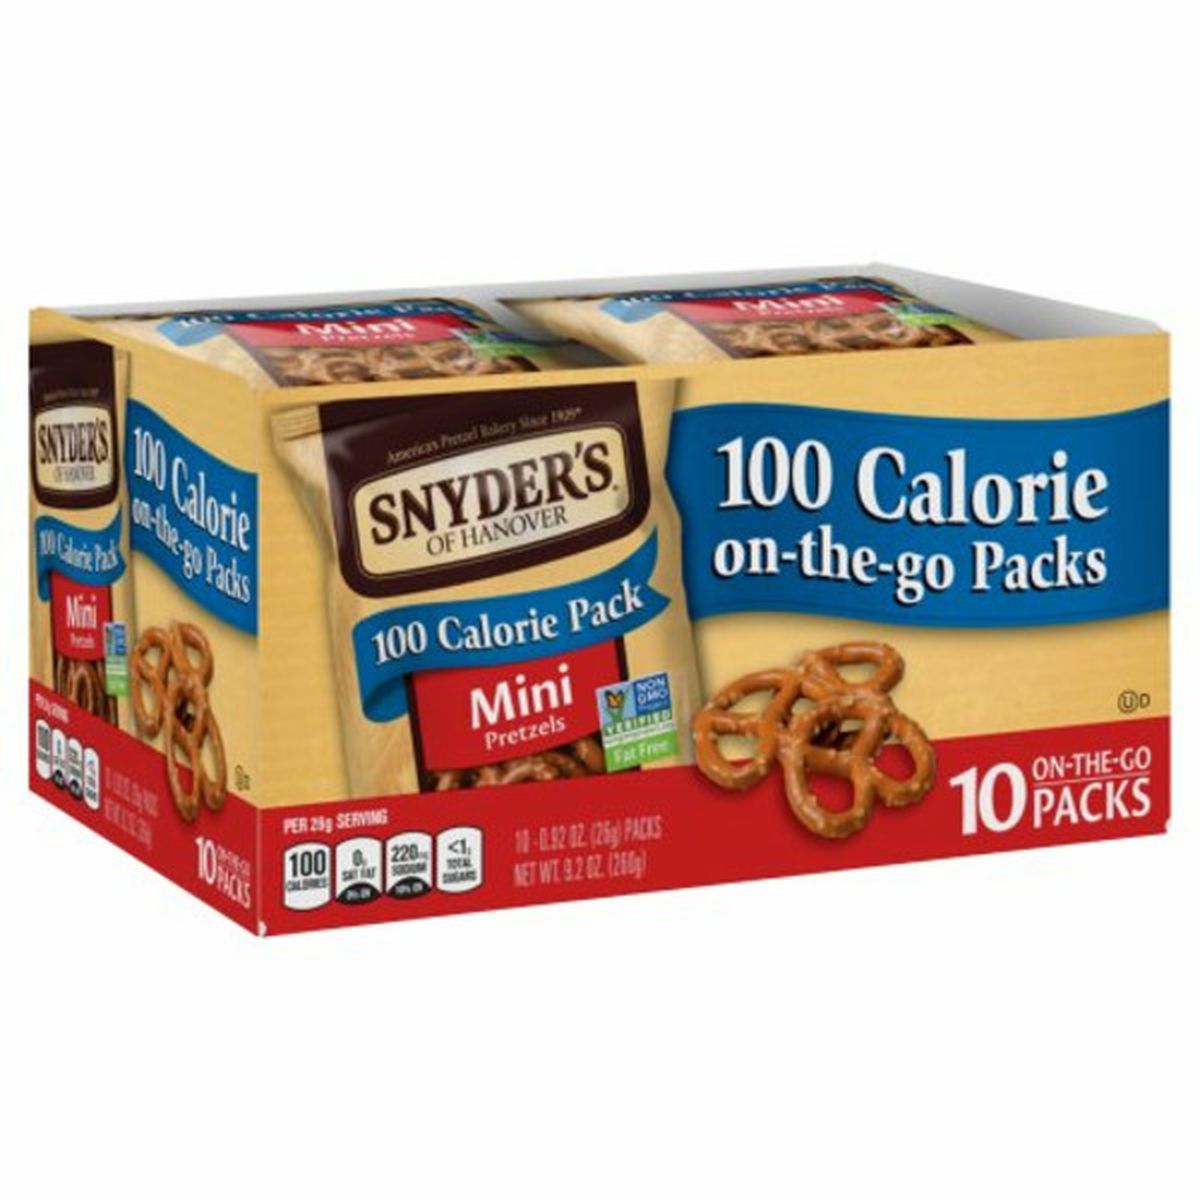 Calories in Snyder's of Hanovers Pretzels, 100 Calorie, Mini, On-the-Go Packs